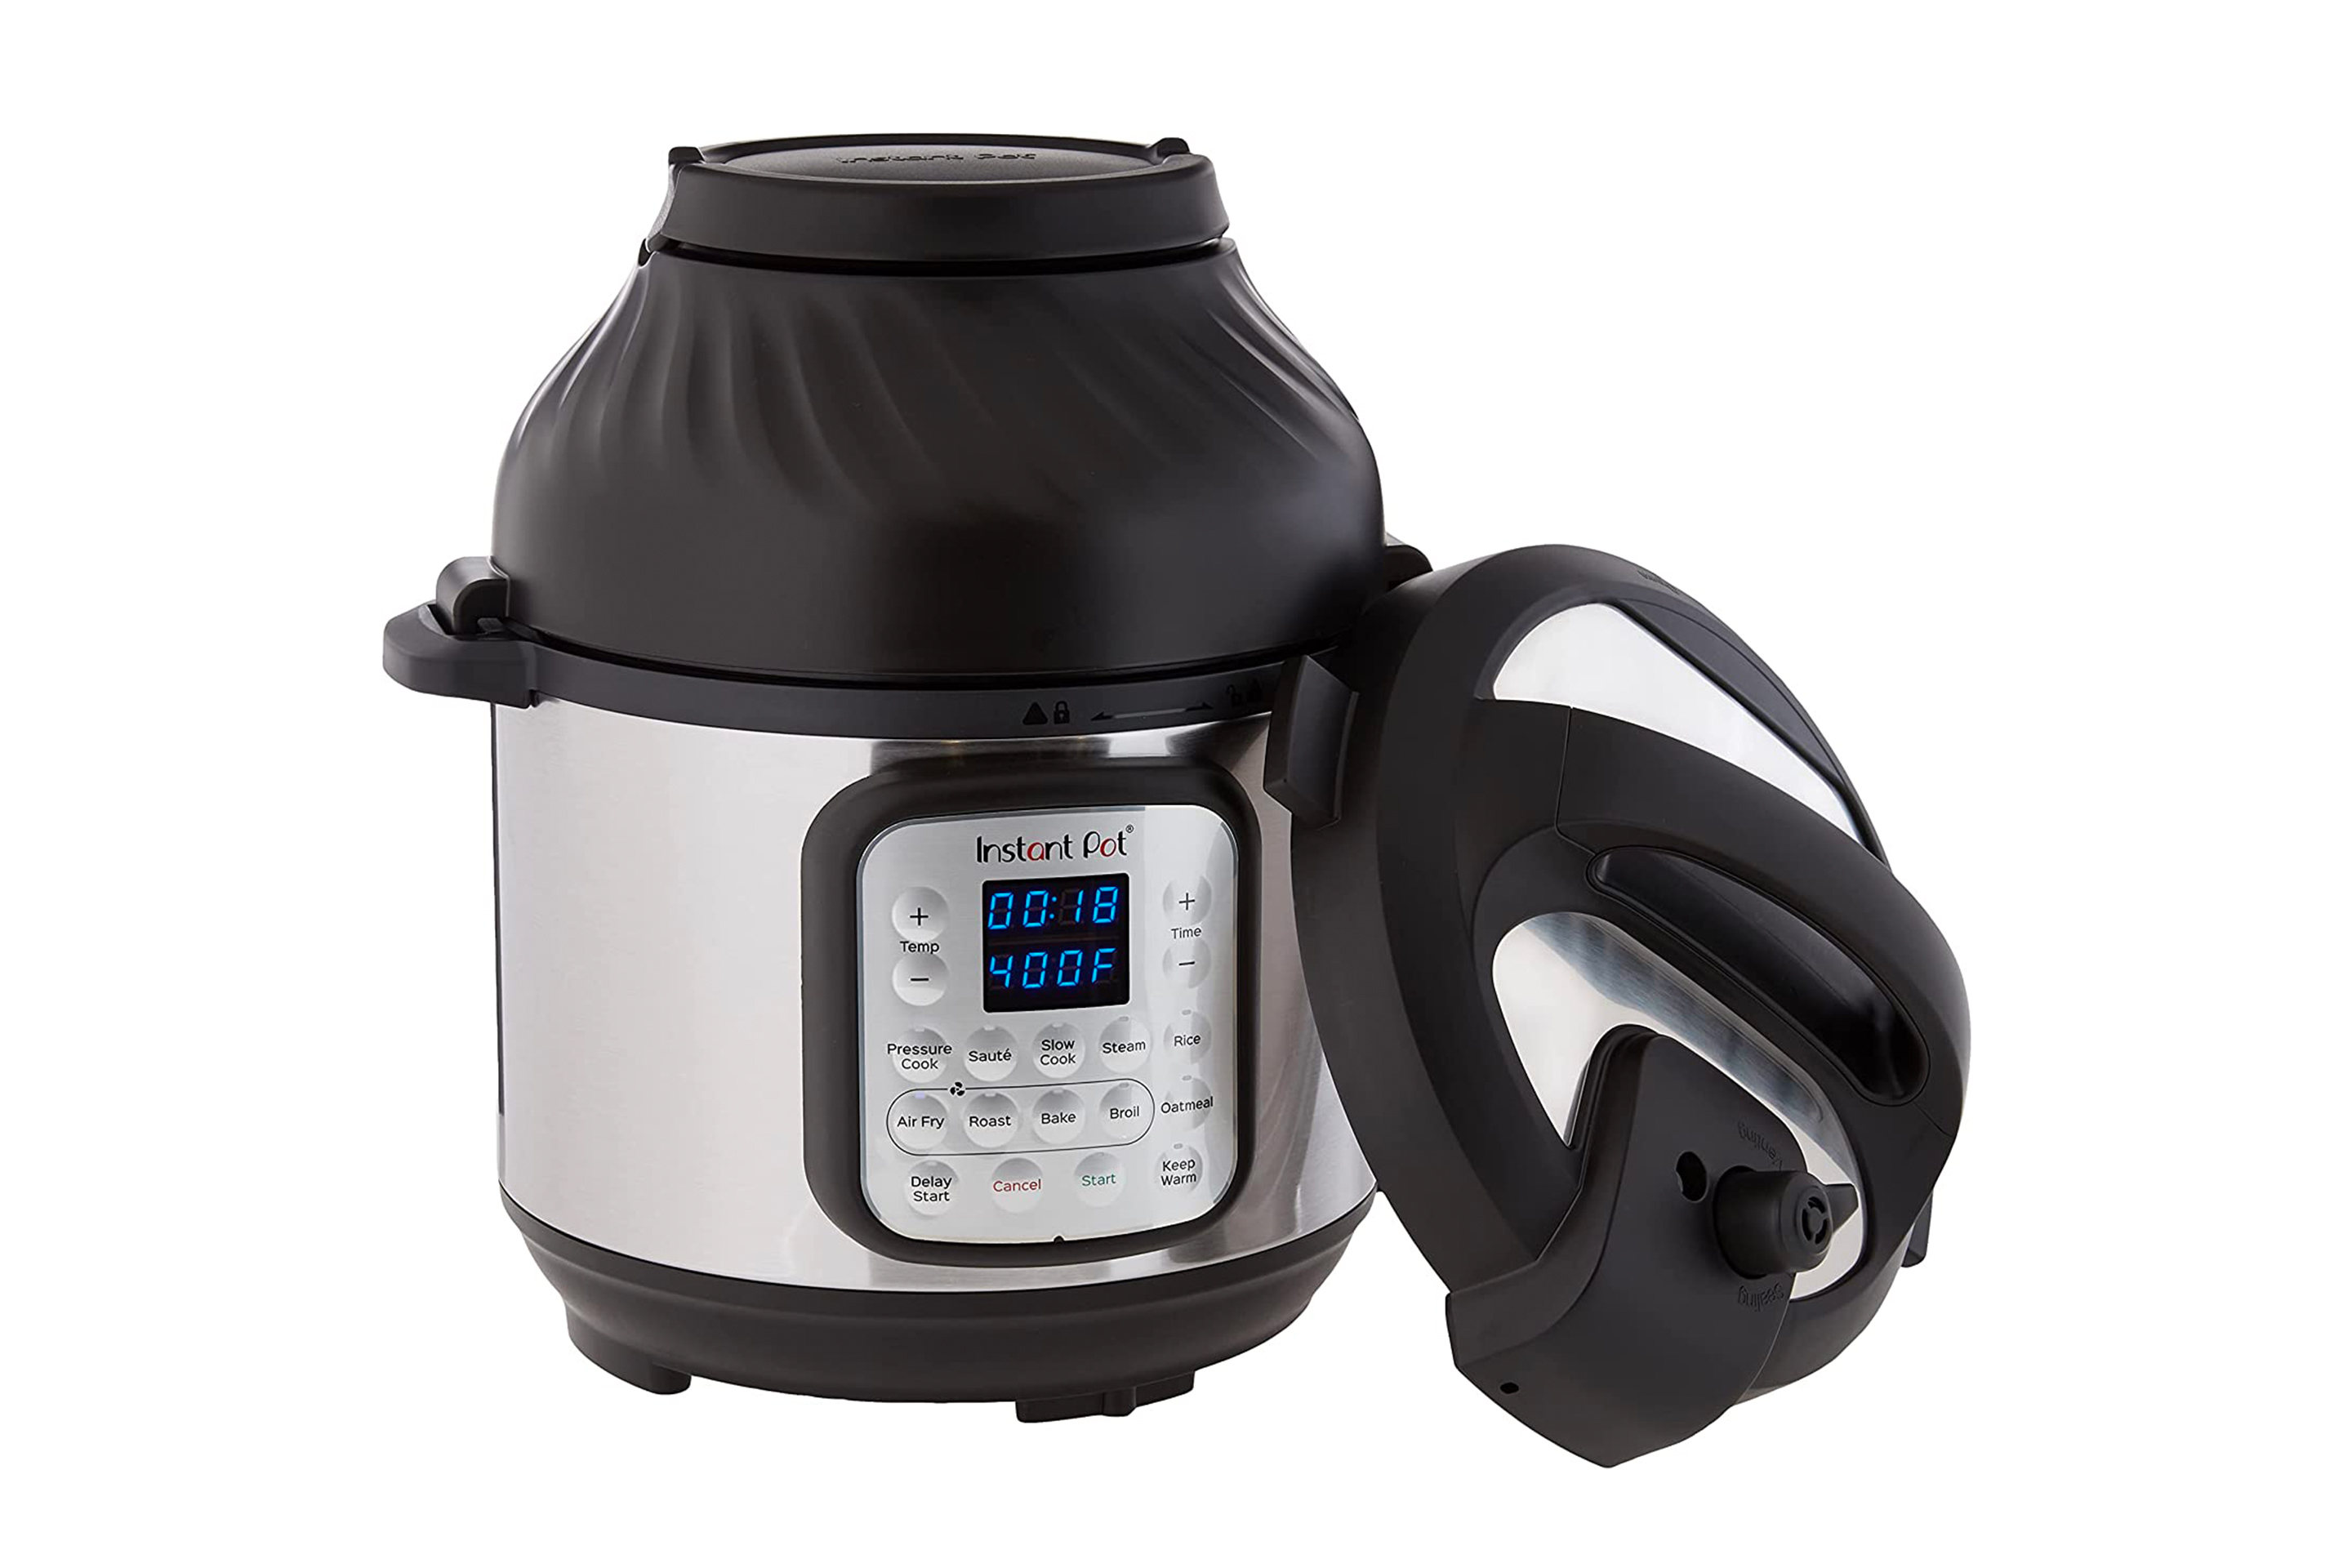 Instant Pot Crisp 9-in-1 Electric Pressure Cooker with Air-Fryer Lid